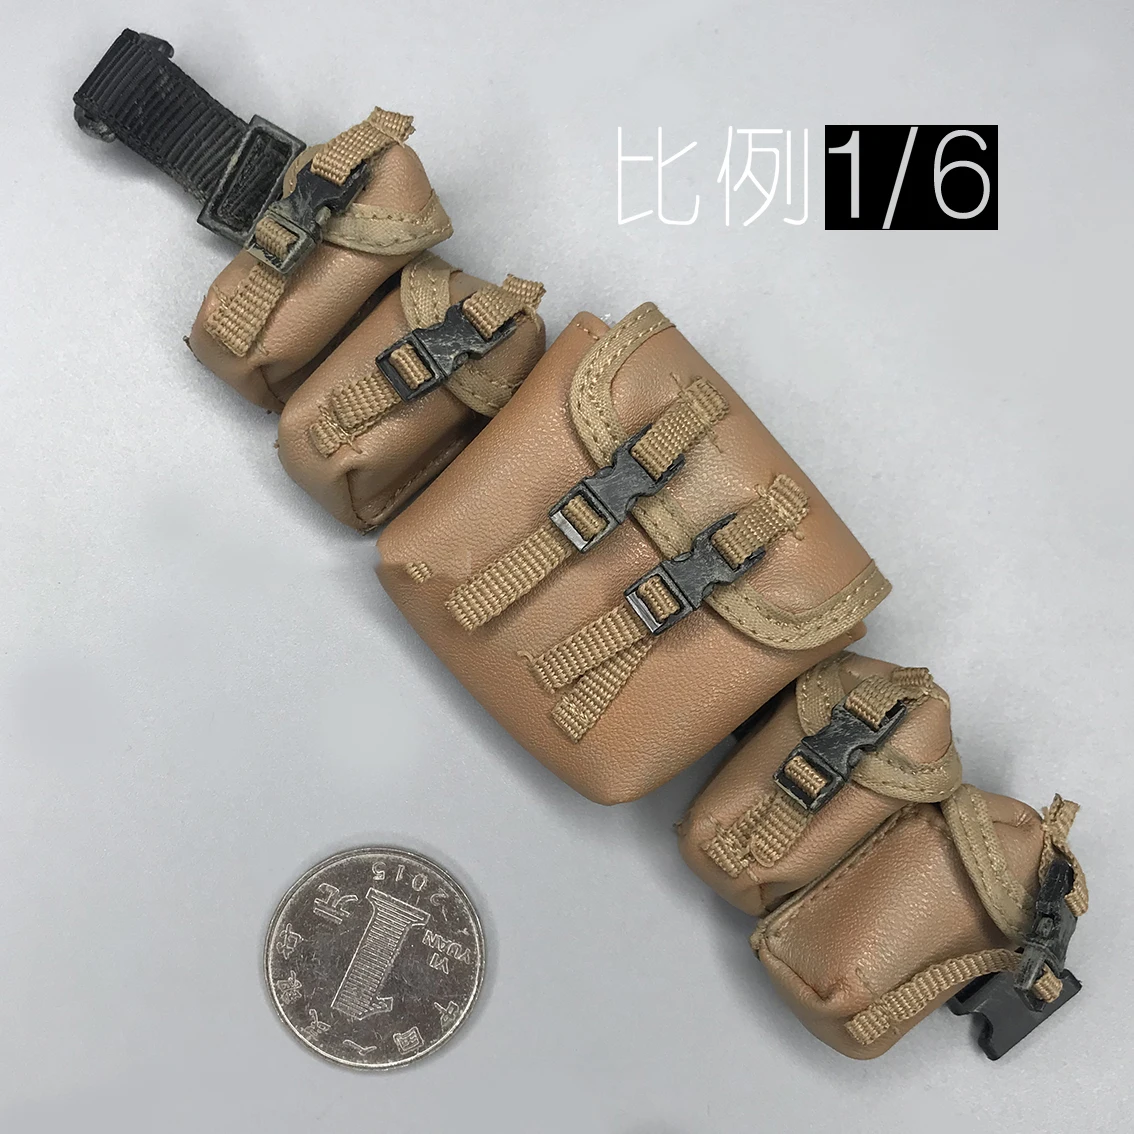 

Devil Toys 1/6 Soldier Model Trend Sci-Fi Doll Waist Bag for 12" Full set Action Figure Doll Collectible